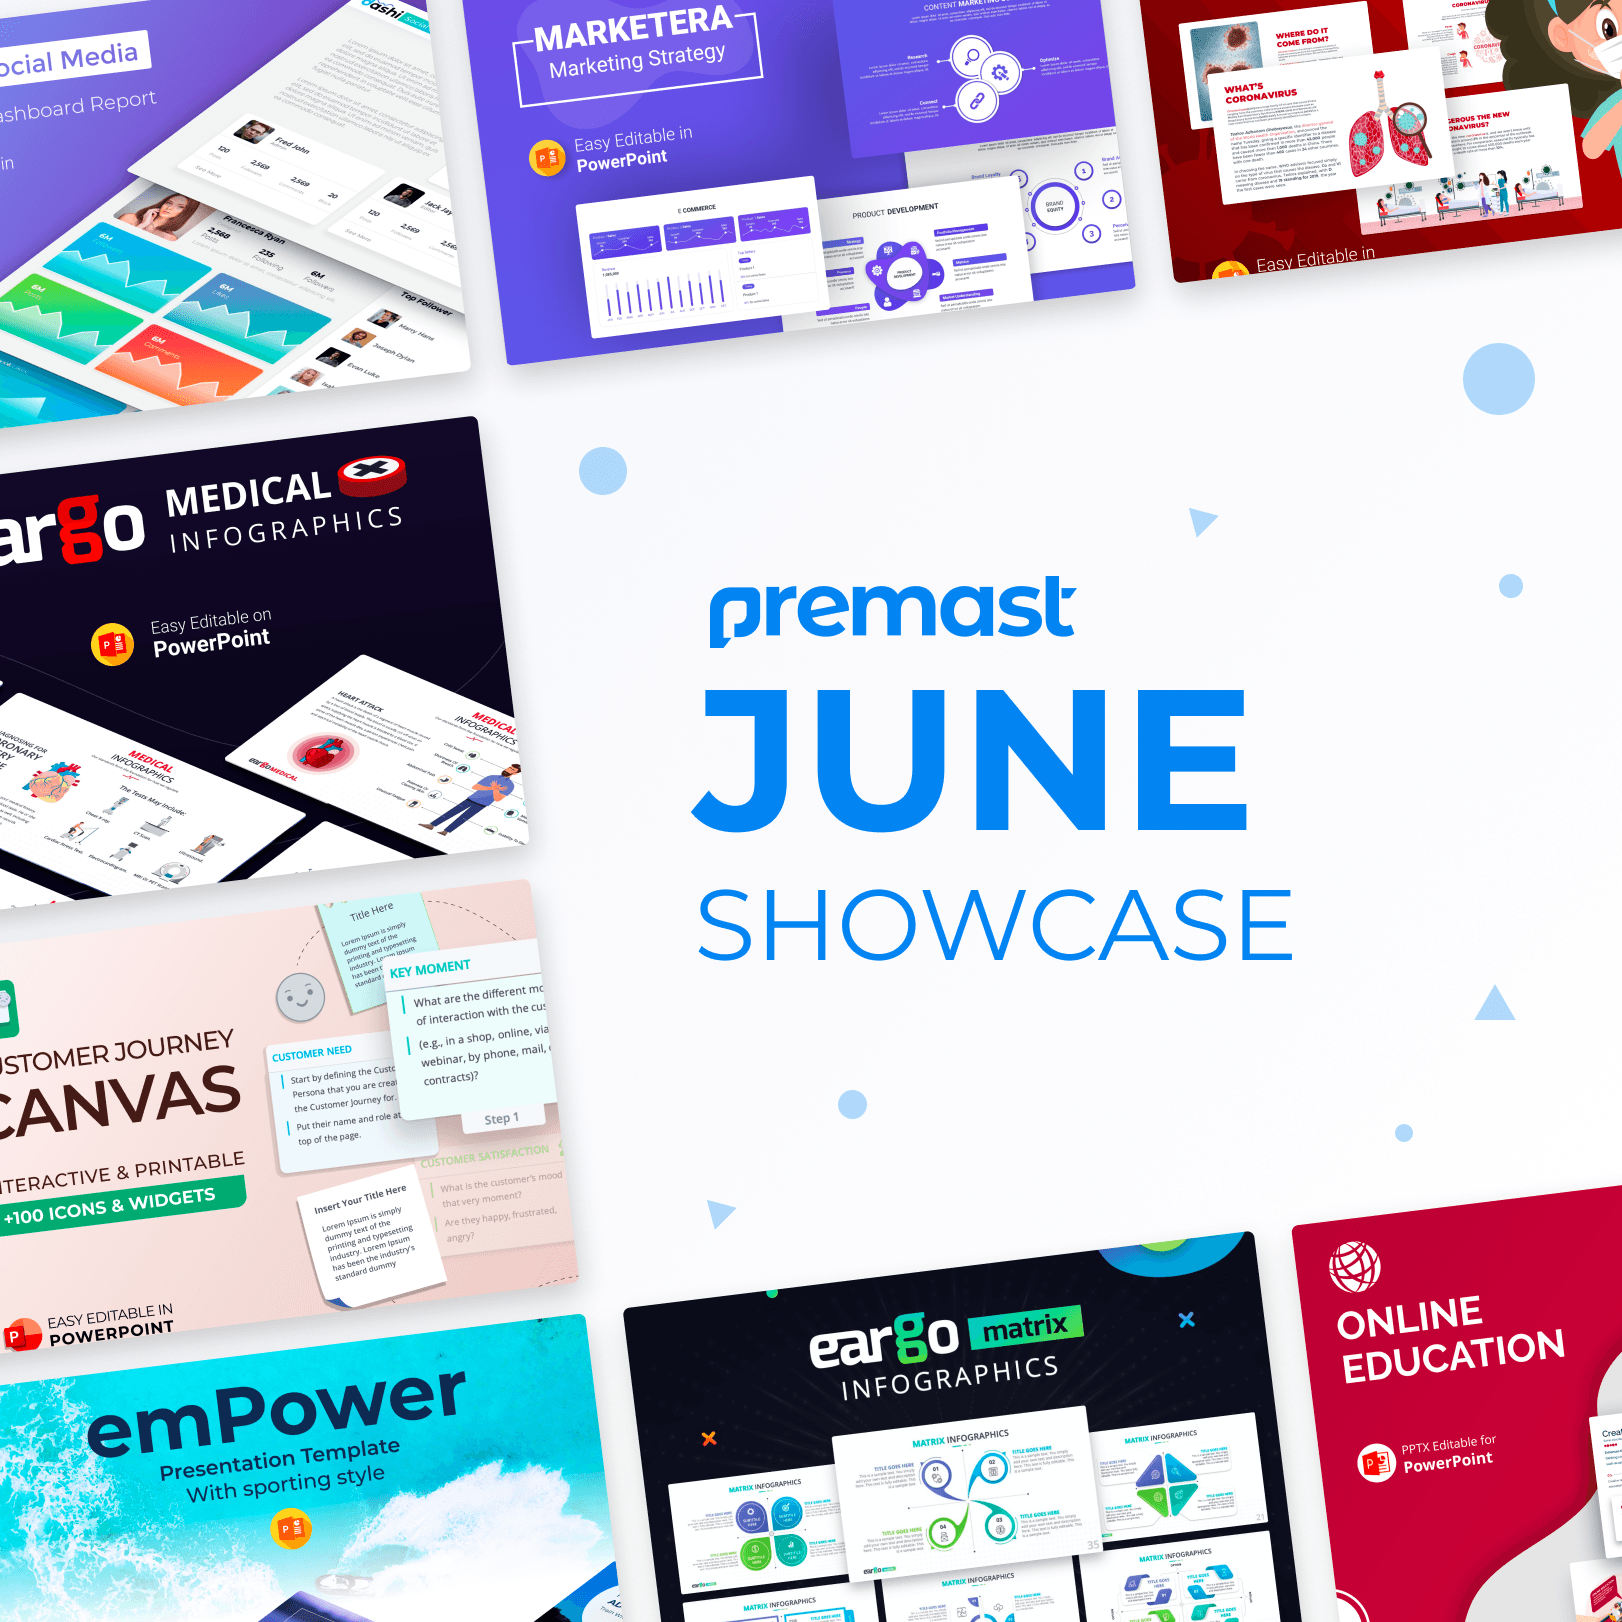 June Showcase: Recently Added, Top Downloaded Presentations and More!